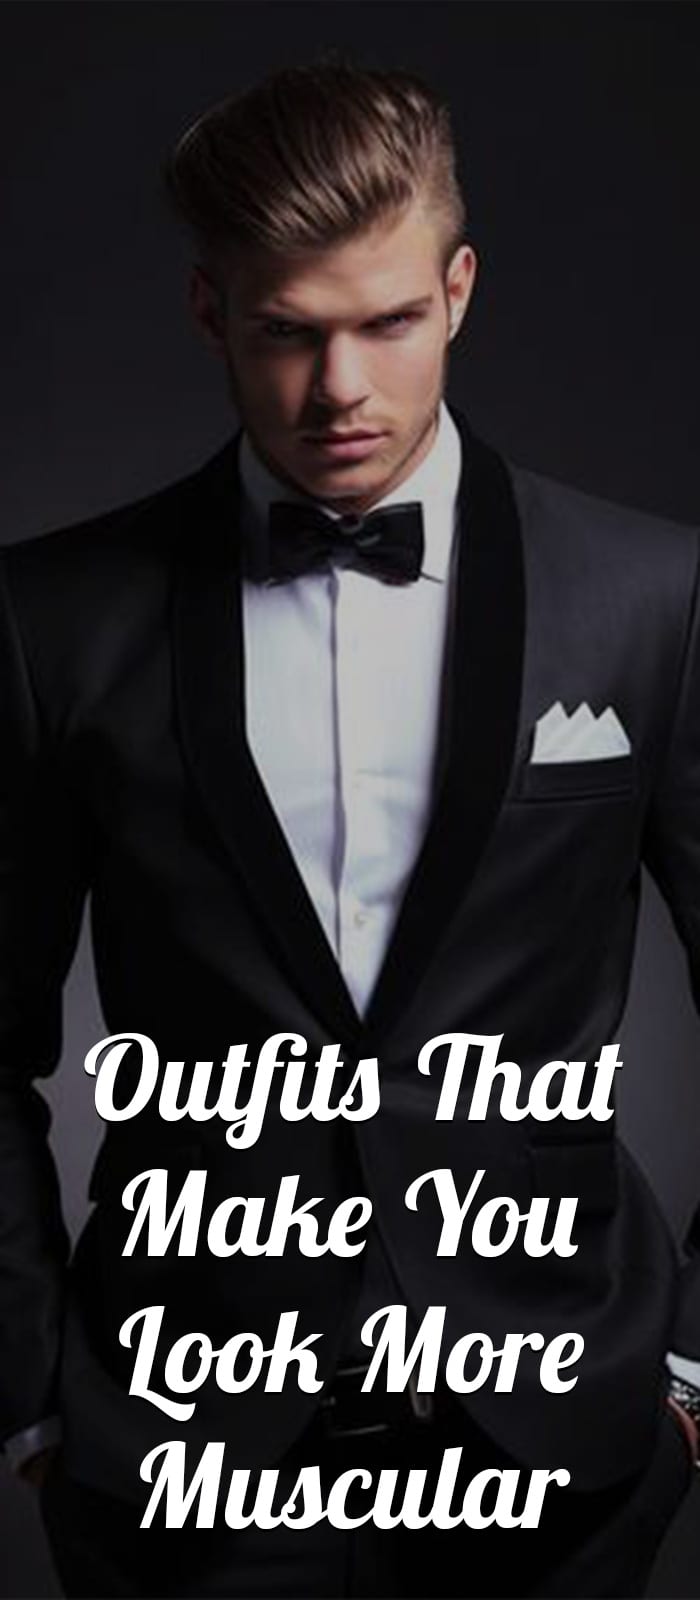 Outfits That Make You Look More Muscular